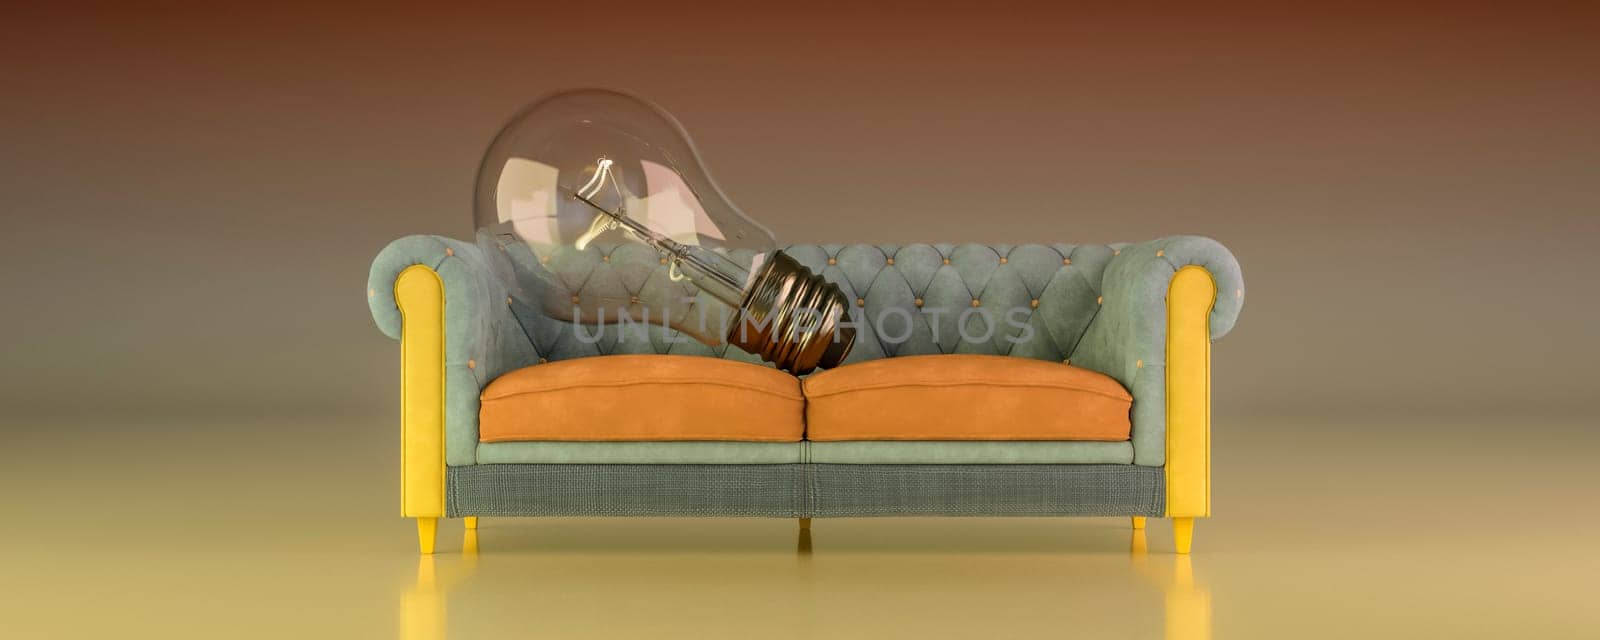 Conceptual Comfort: A Classic Couch Cradling a Colossal Lightbulb by Juanjo39